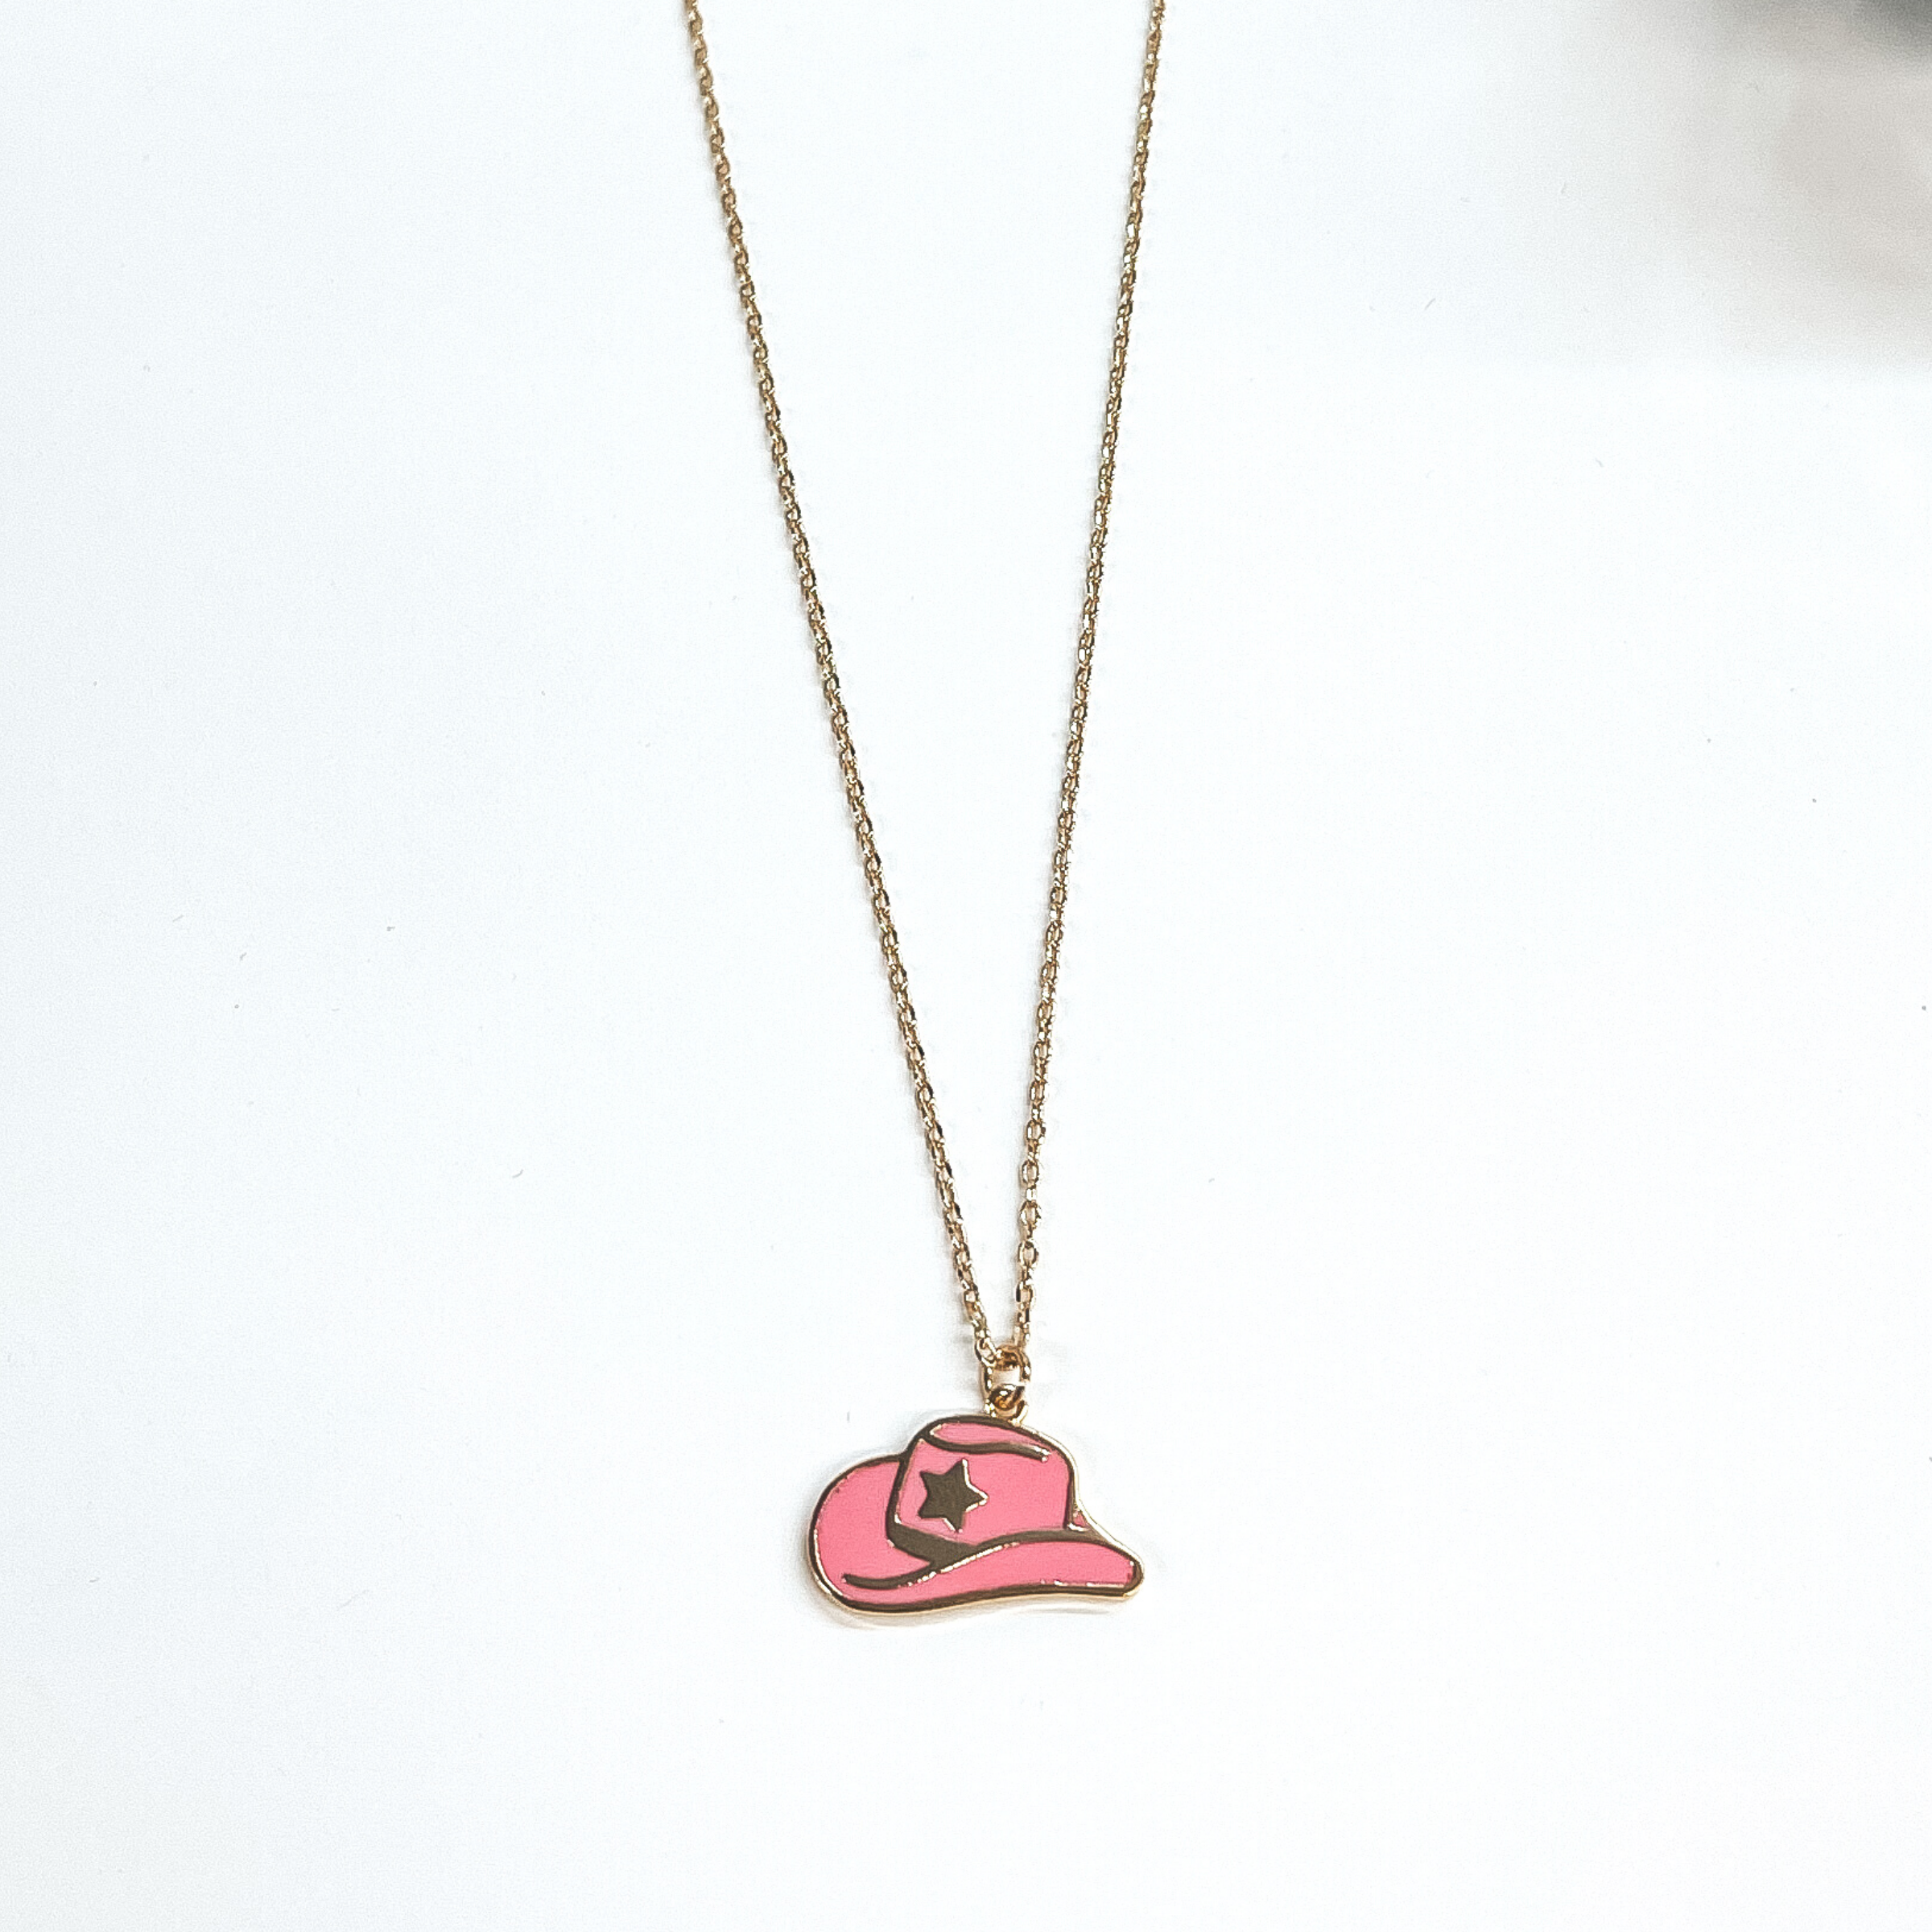 Take Me to Nashville Gold Necklace with Hat Pendant in Pink - Giddy Up Glamour Boutique